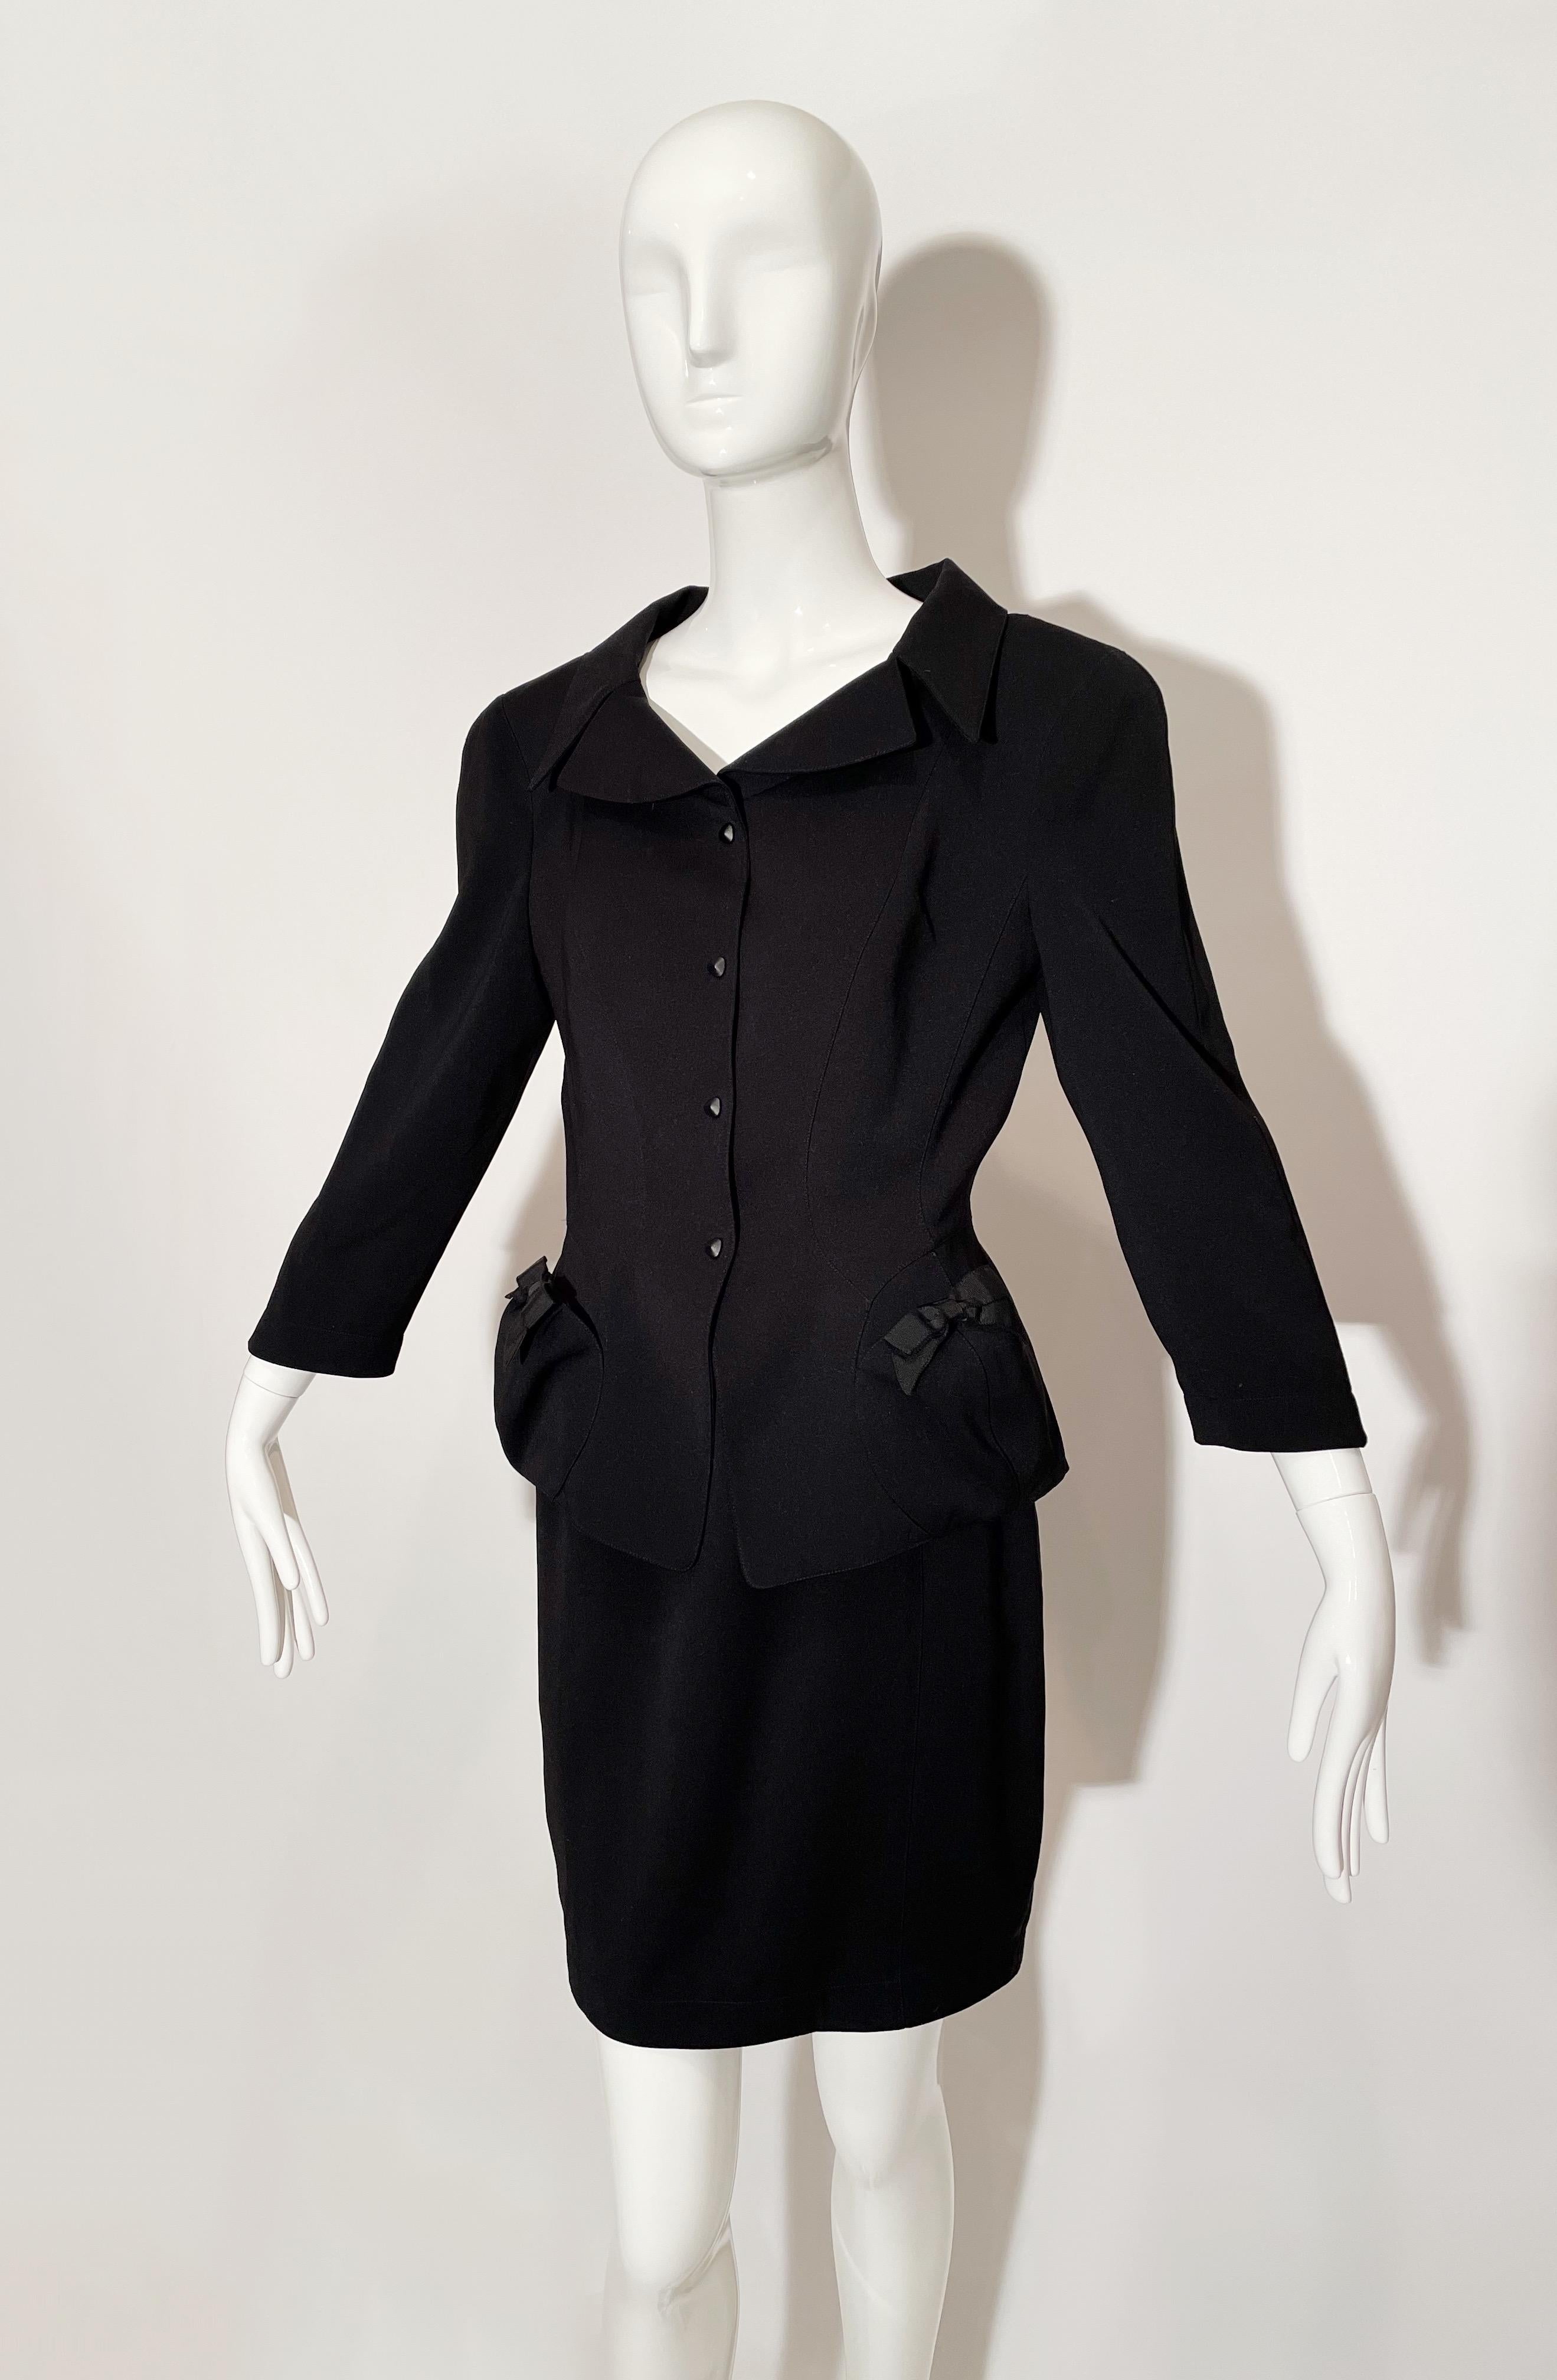 Thierry Mugler Black Bow Skirt Suit  In Excellent Condition For Sale In Waterford, MI